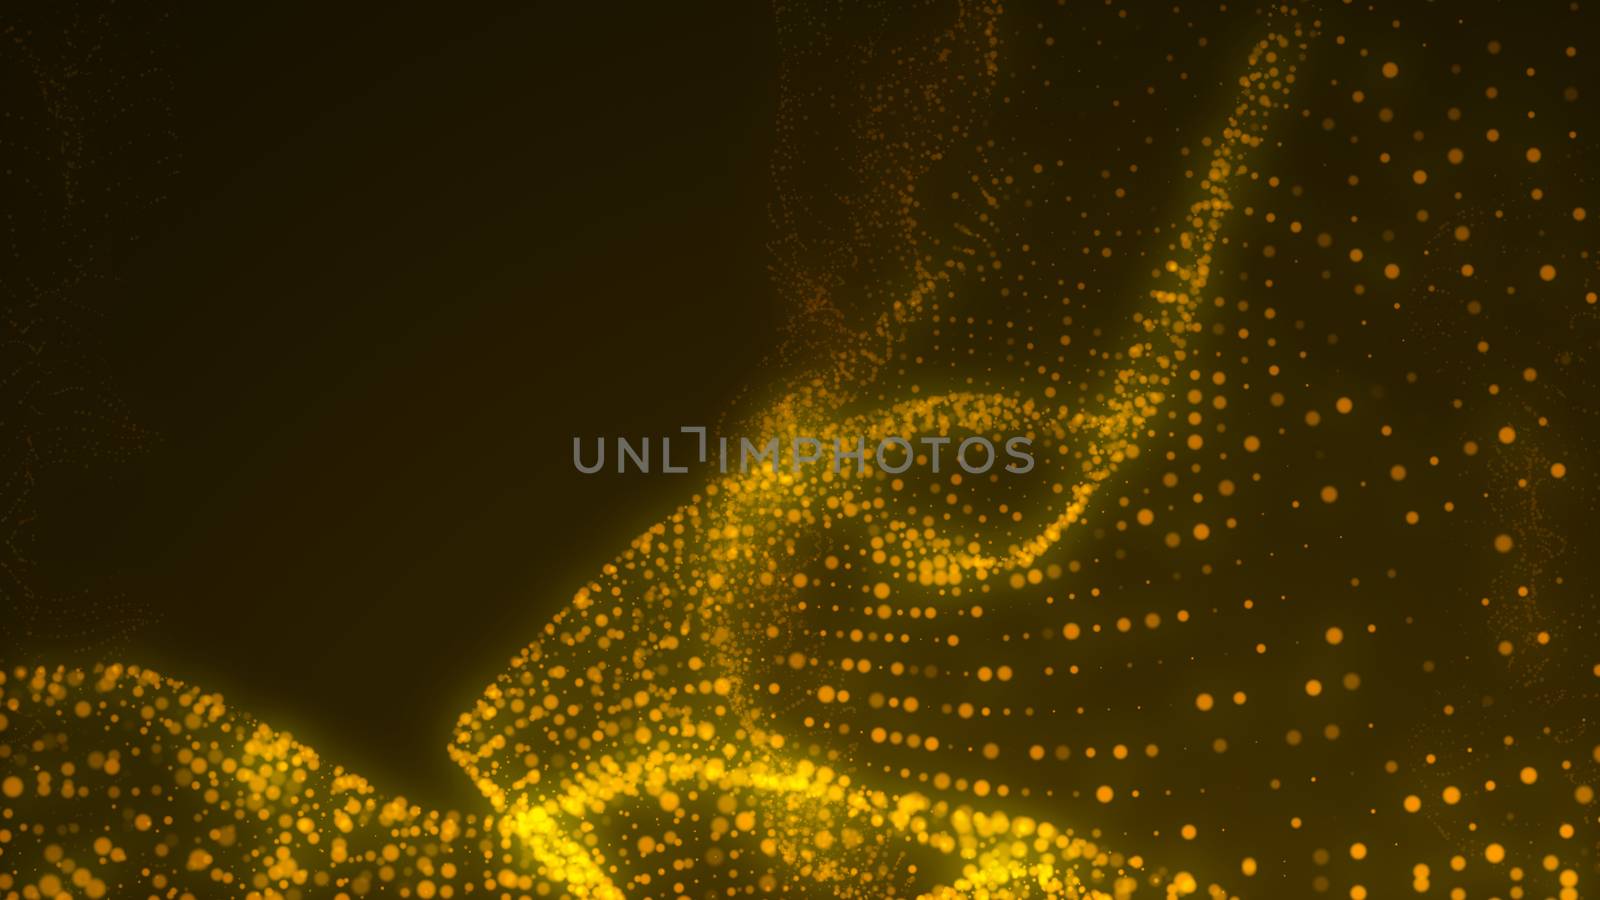 Waving particles floor. Abstract background by nolimit046